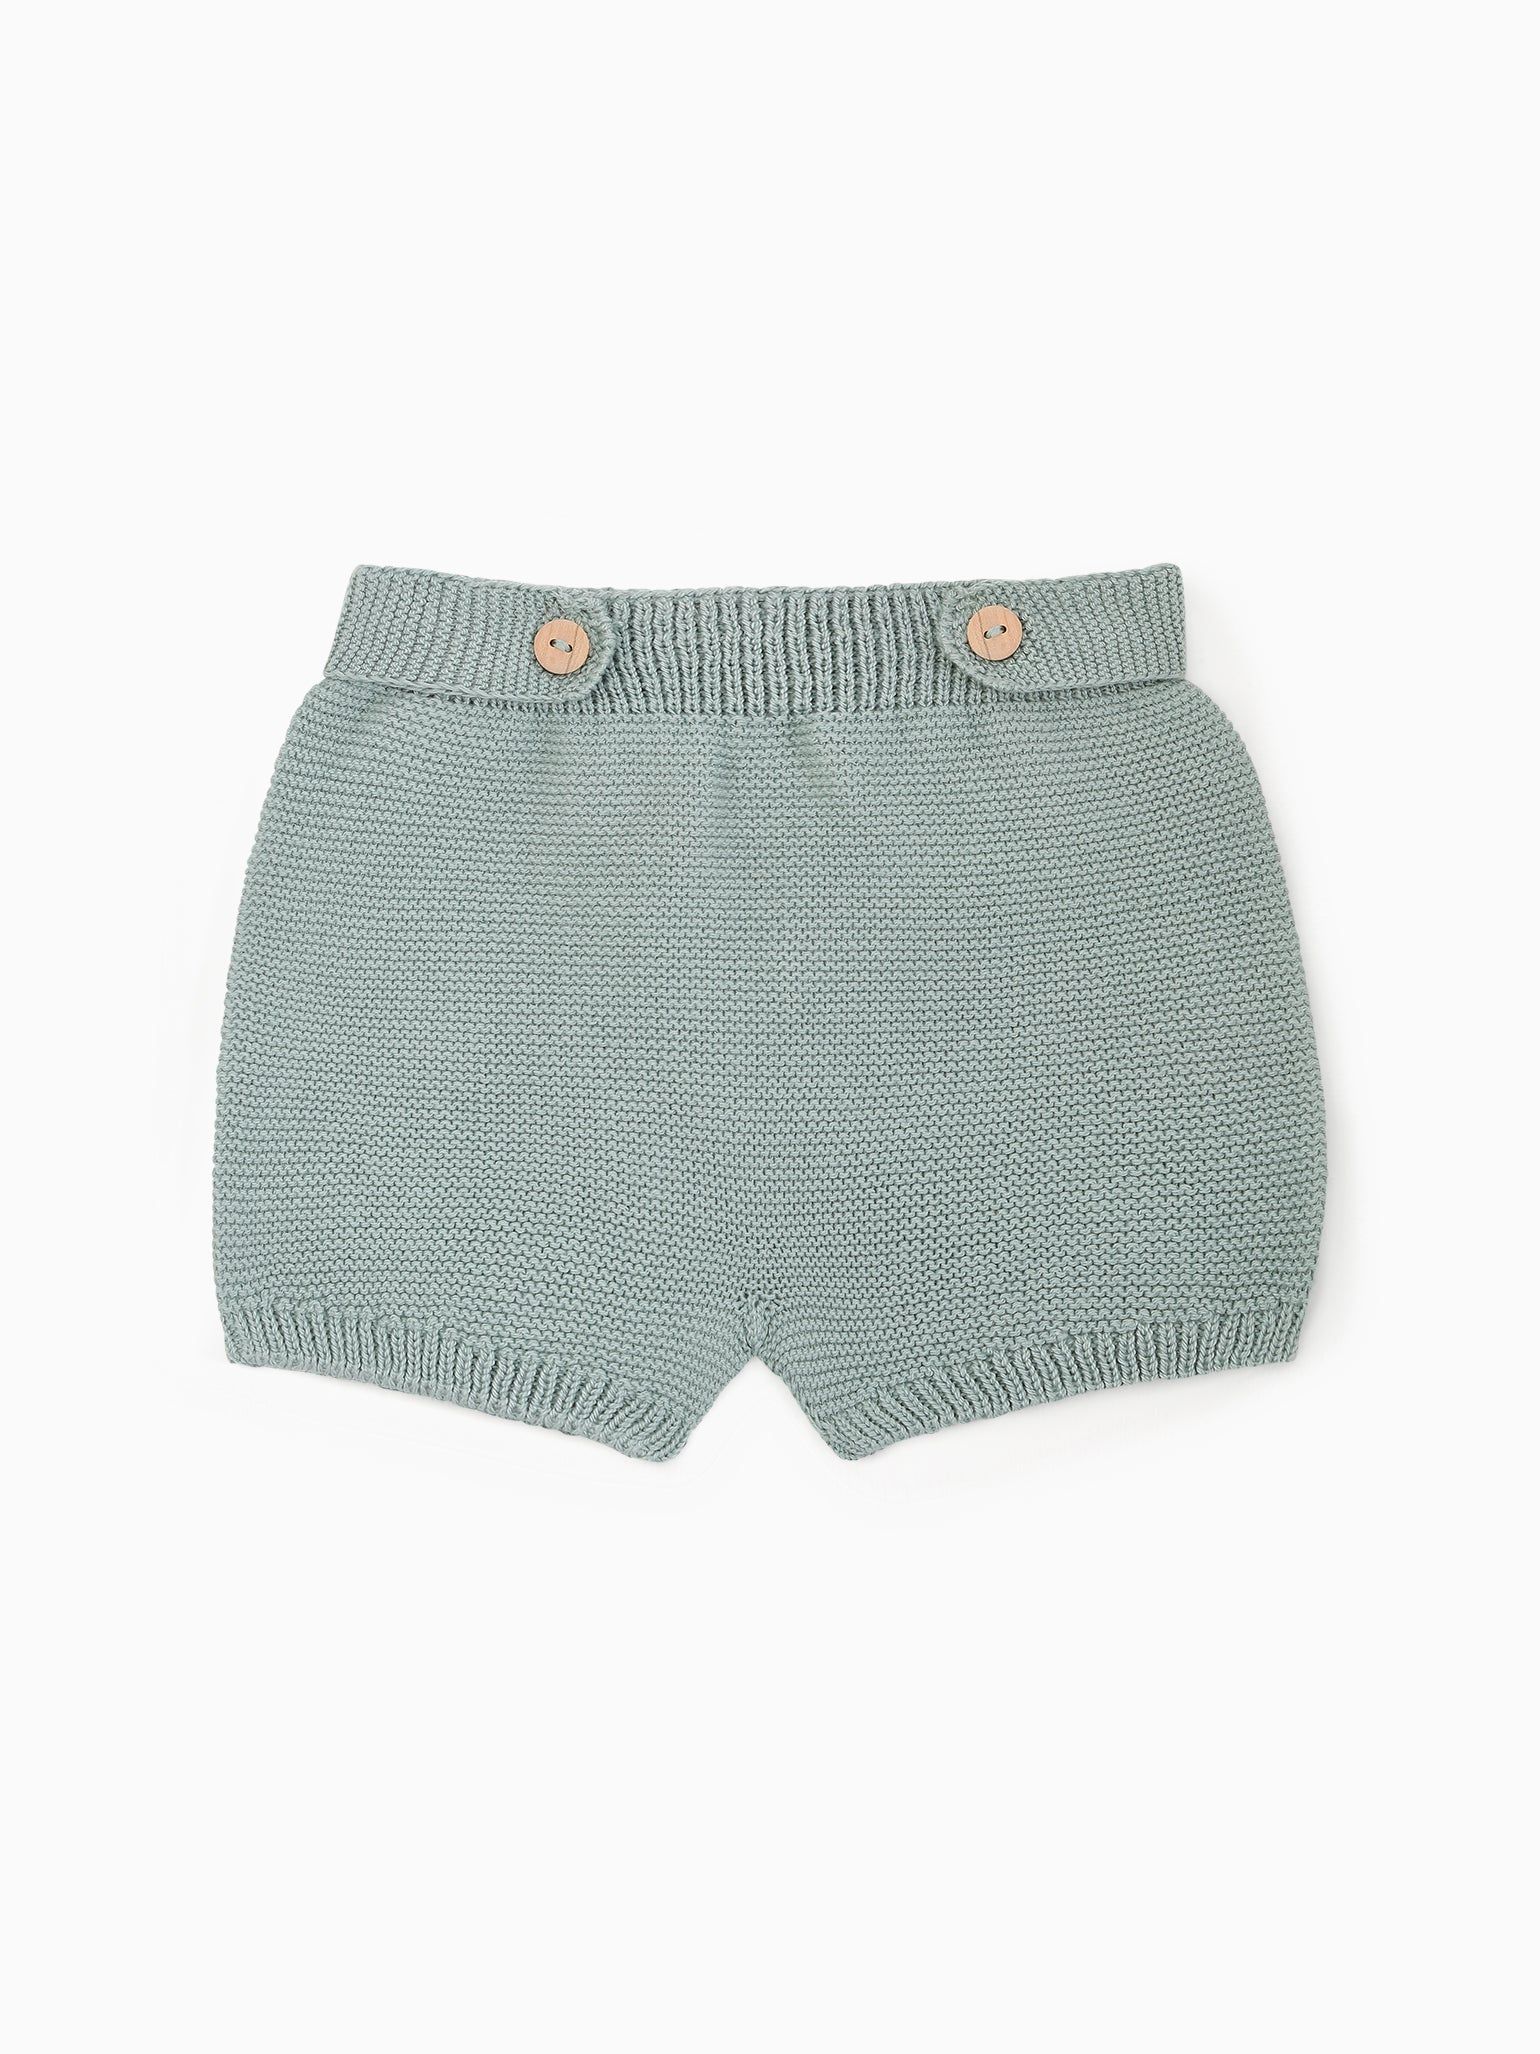 Sage Teo Cotton Knitted Bloomers | La Coqueta (US)